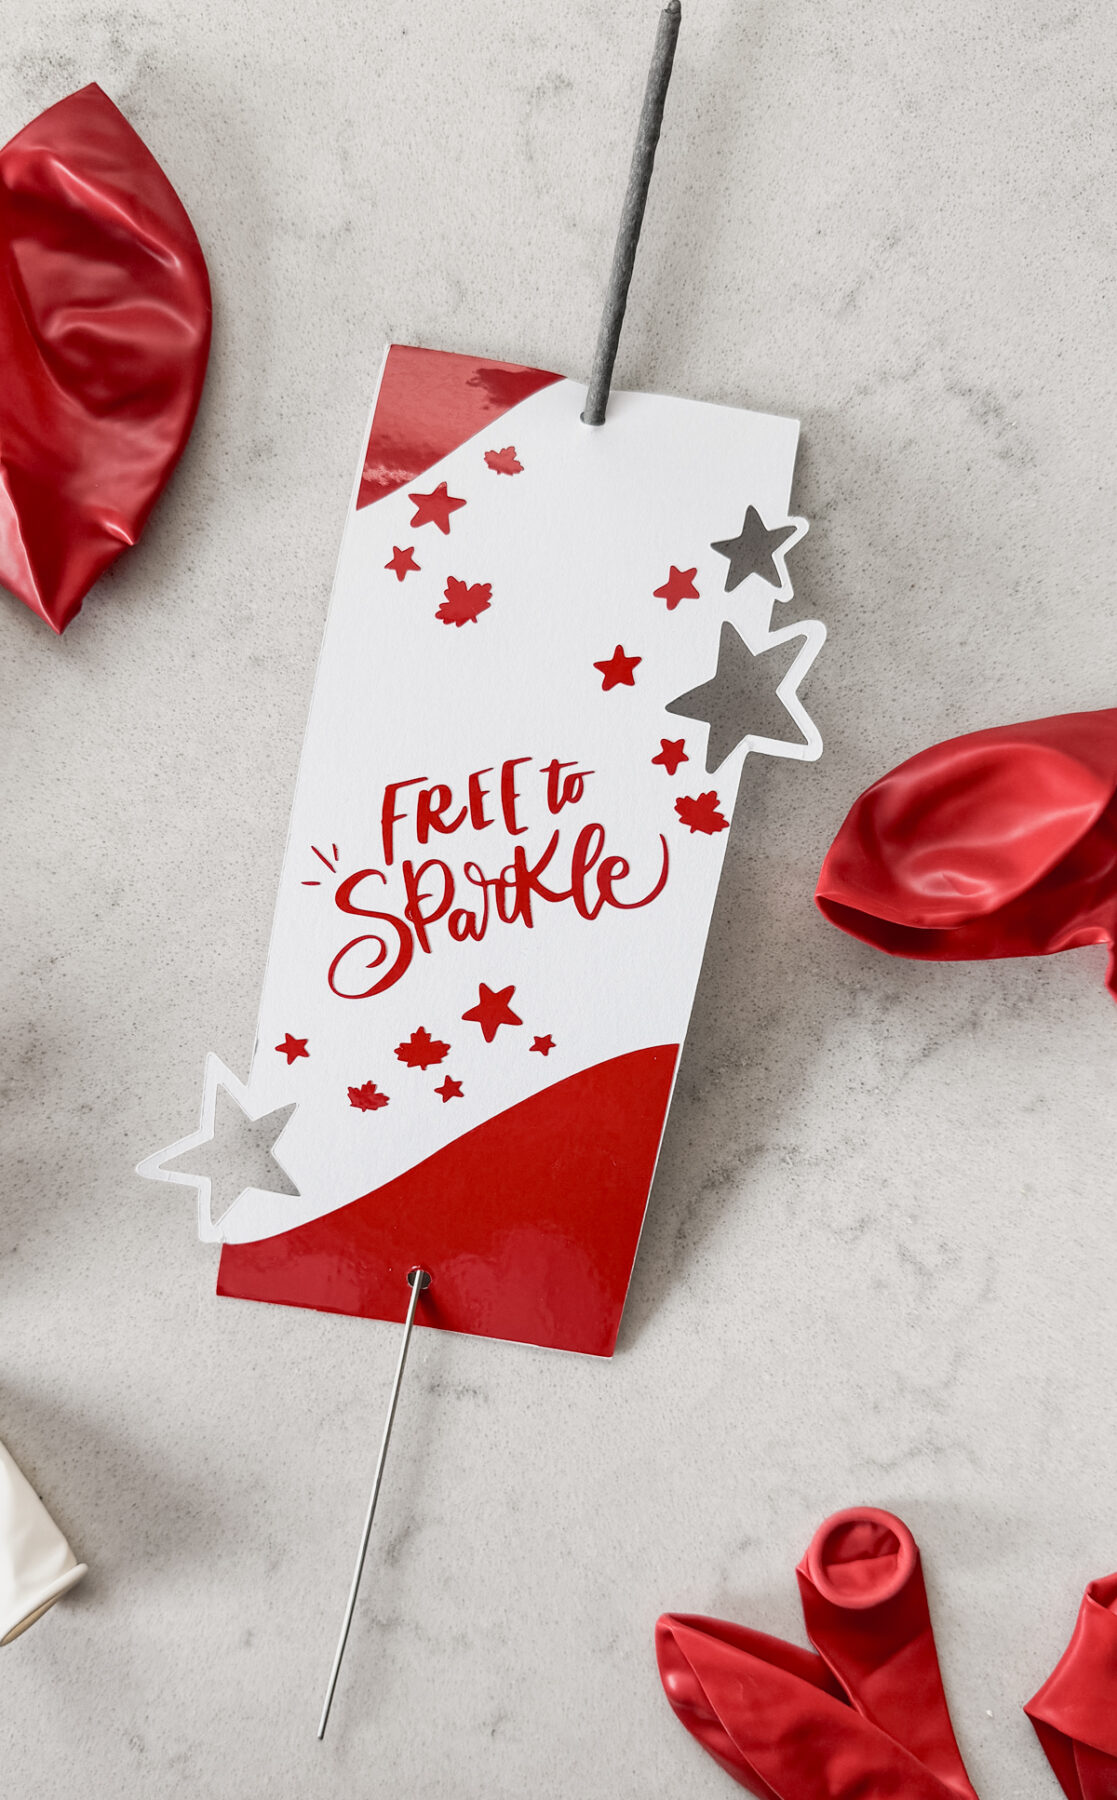 image of sparkler holder made with cricut- design has stars and maple leaves and the hand lettering 'free to sparkle' sparkler holder shown on marble countertop with red and white balloons